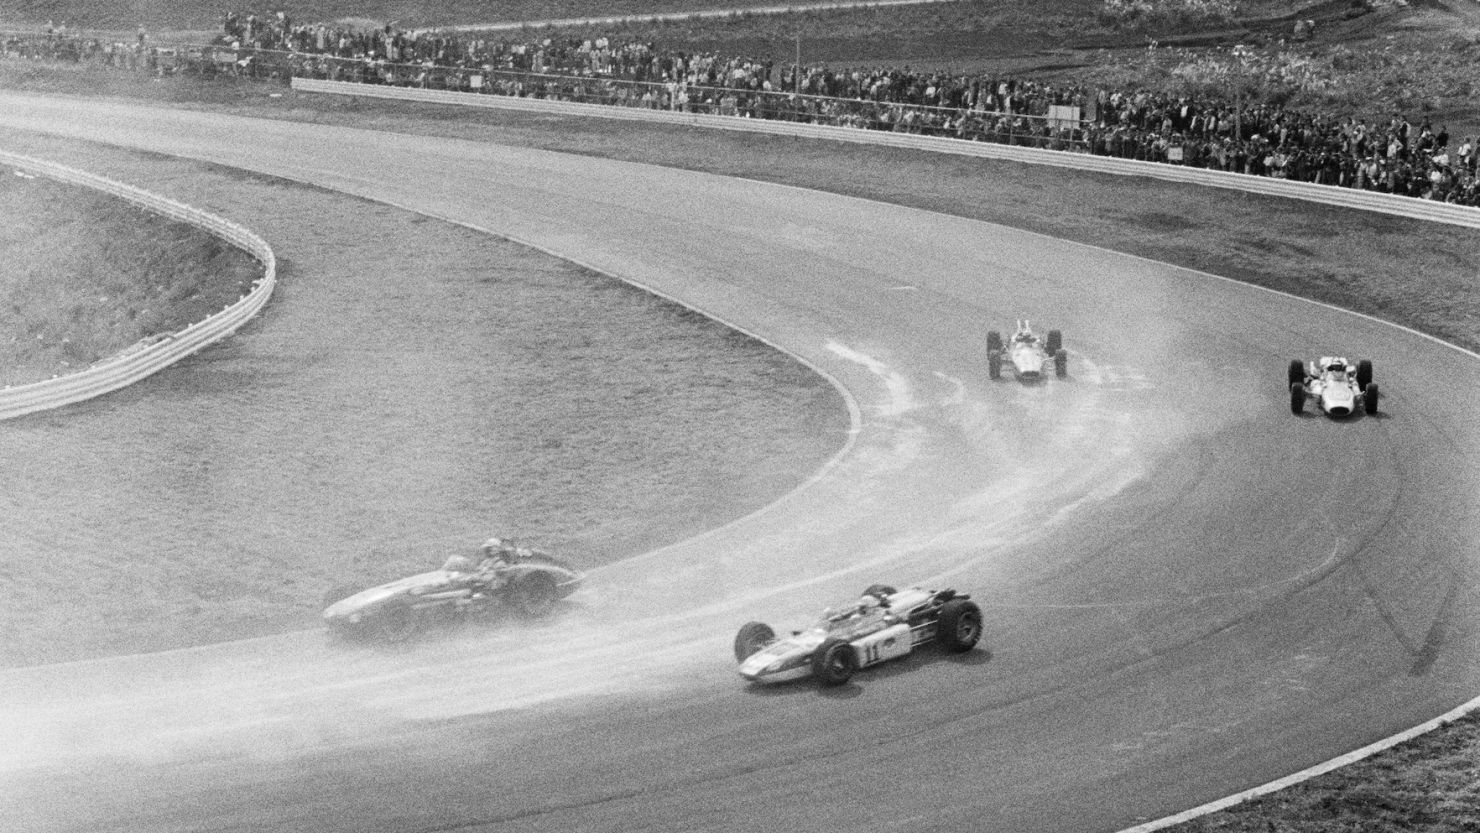 Photographer Joe Honda considered the Fuji International Speedway circuit as his spiritual homeland and the catalyst for his life of global adventure. After the Indy 200 race in 1966, he decided to break with convention and travel to Europe to document international motorsports.